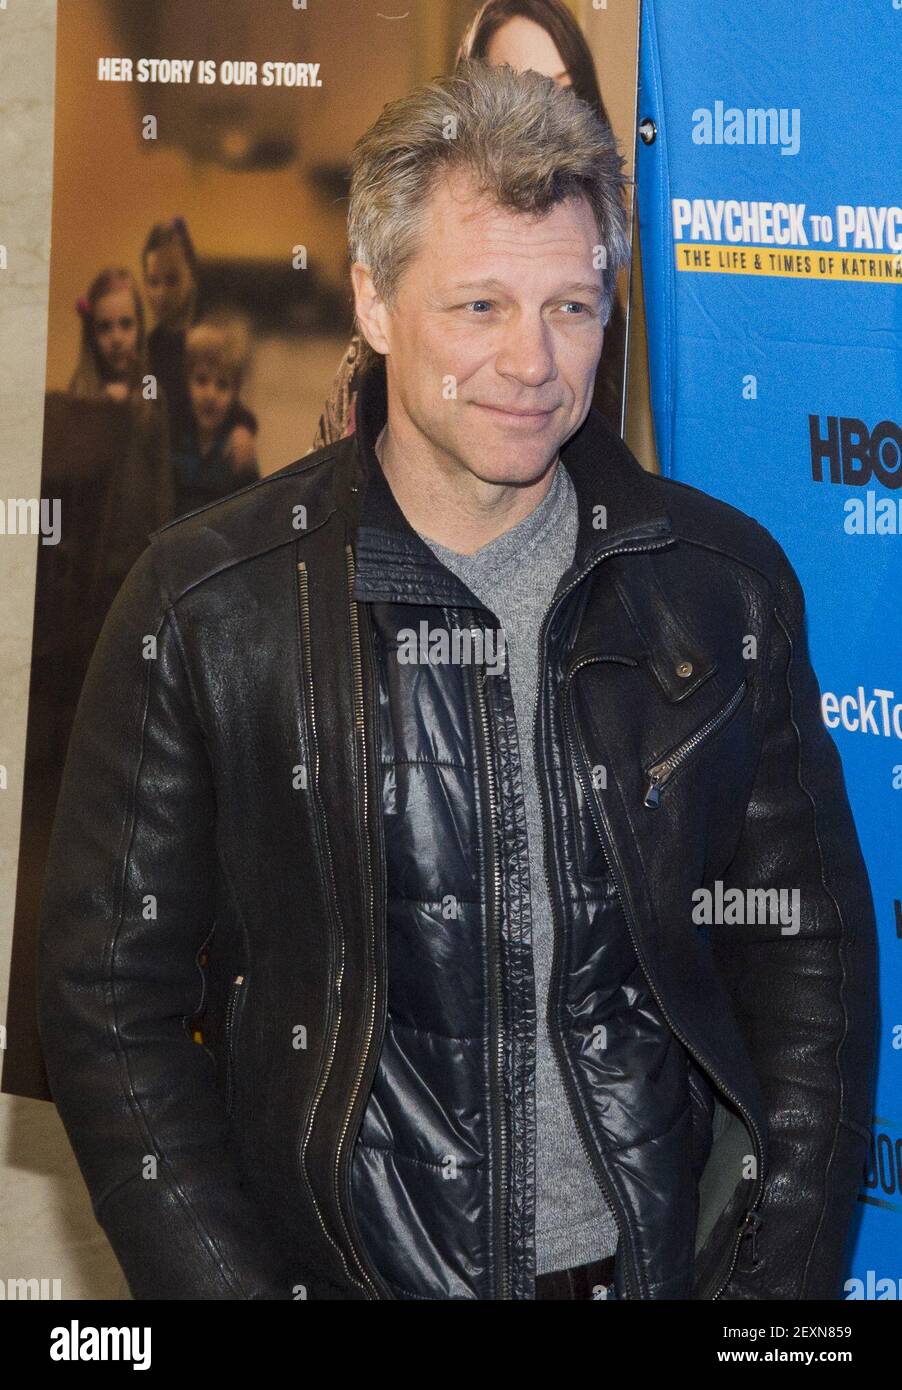 Jon Bon Jovi attends the HBO's Documentary "Paycheck To Paycheck: The Life  And Times Of Katrina Gilbert" in New York City, NY on March 13, 2014.  (Photo by Marco Sagliocco/SIPA USA Stock